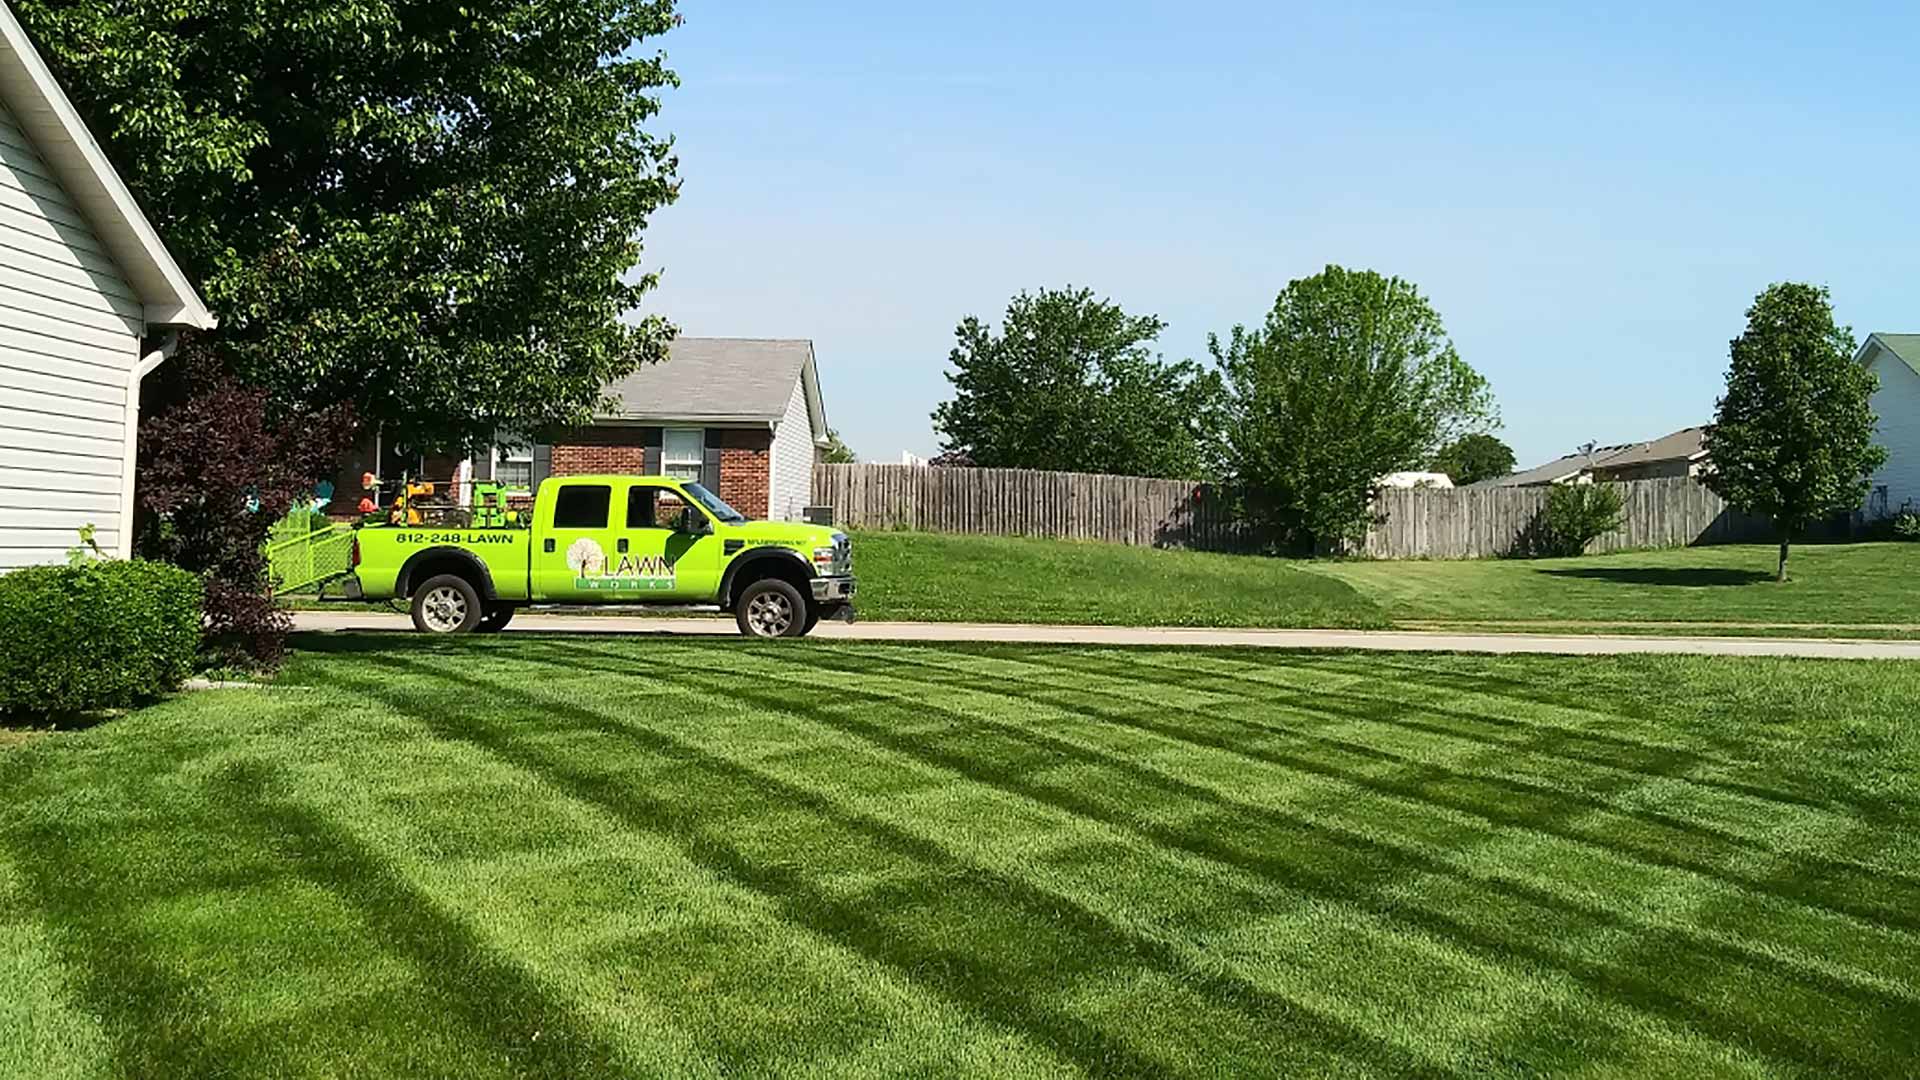 Lawn Works work truck at a property in Jeffersonville, IN.